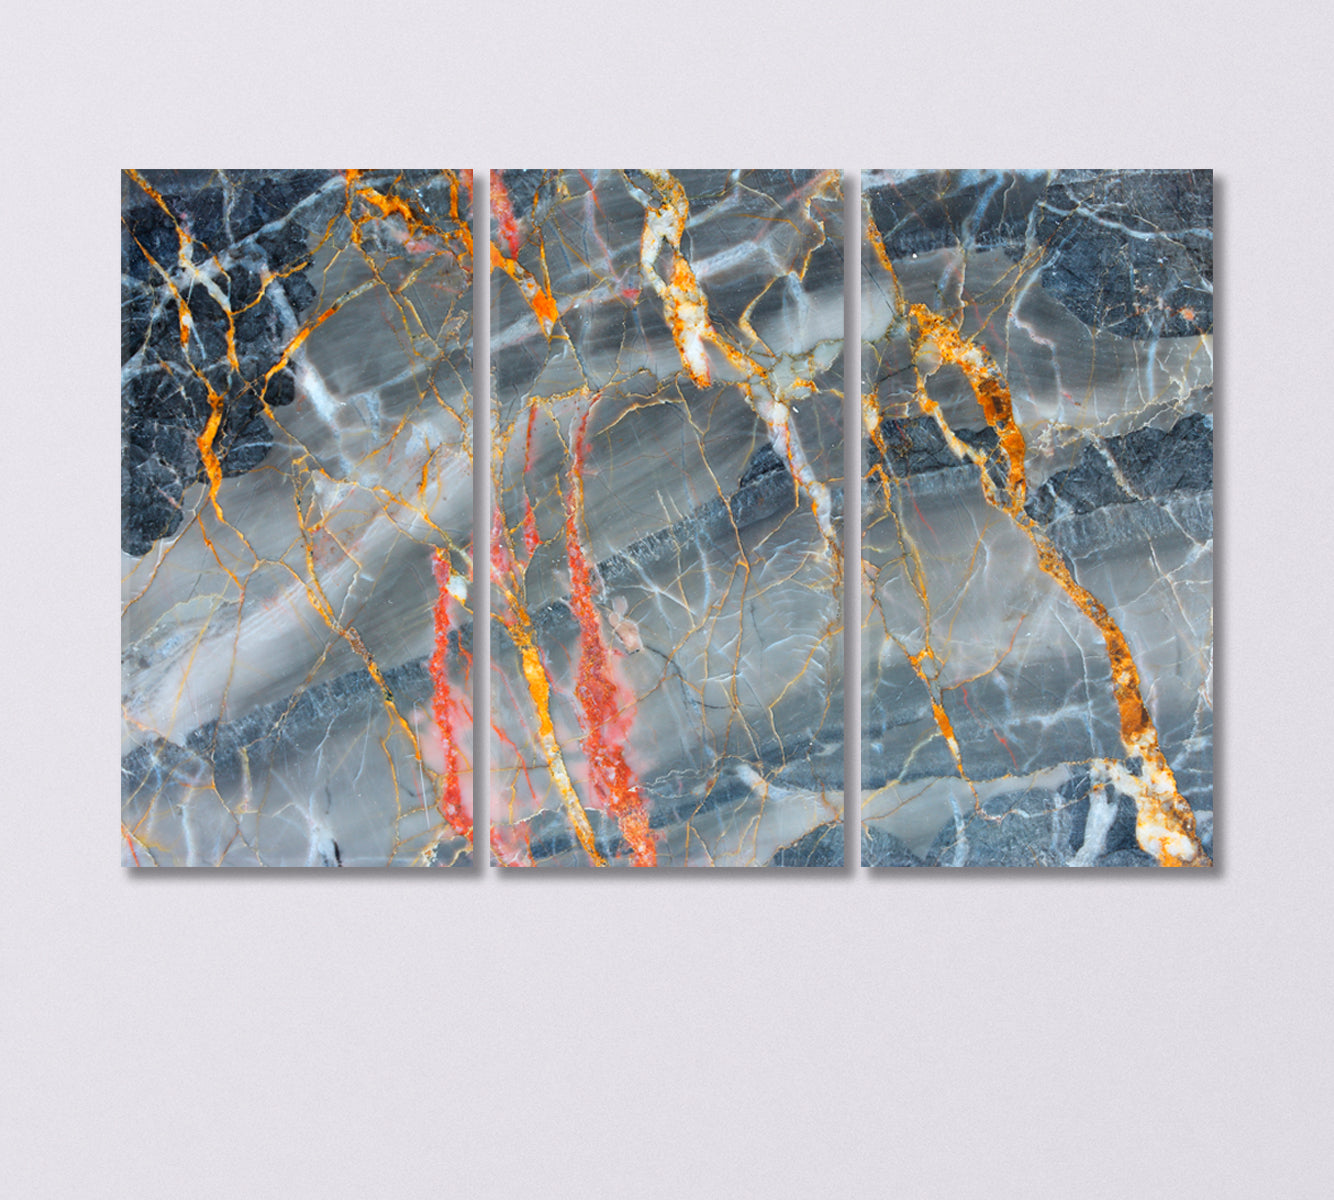 Gray Marble with Yellow and Red Strokes Canvas Print-Canvas Print-CetArt-3 Panels-36x24 inches-CetArt